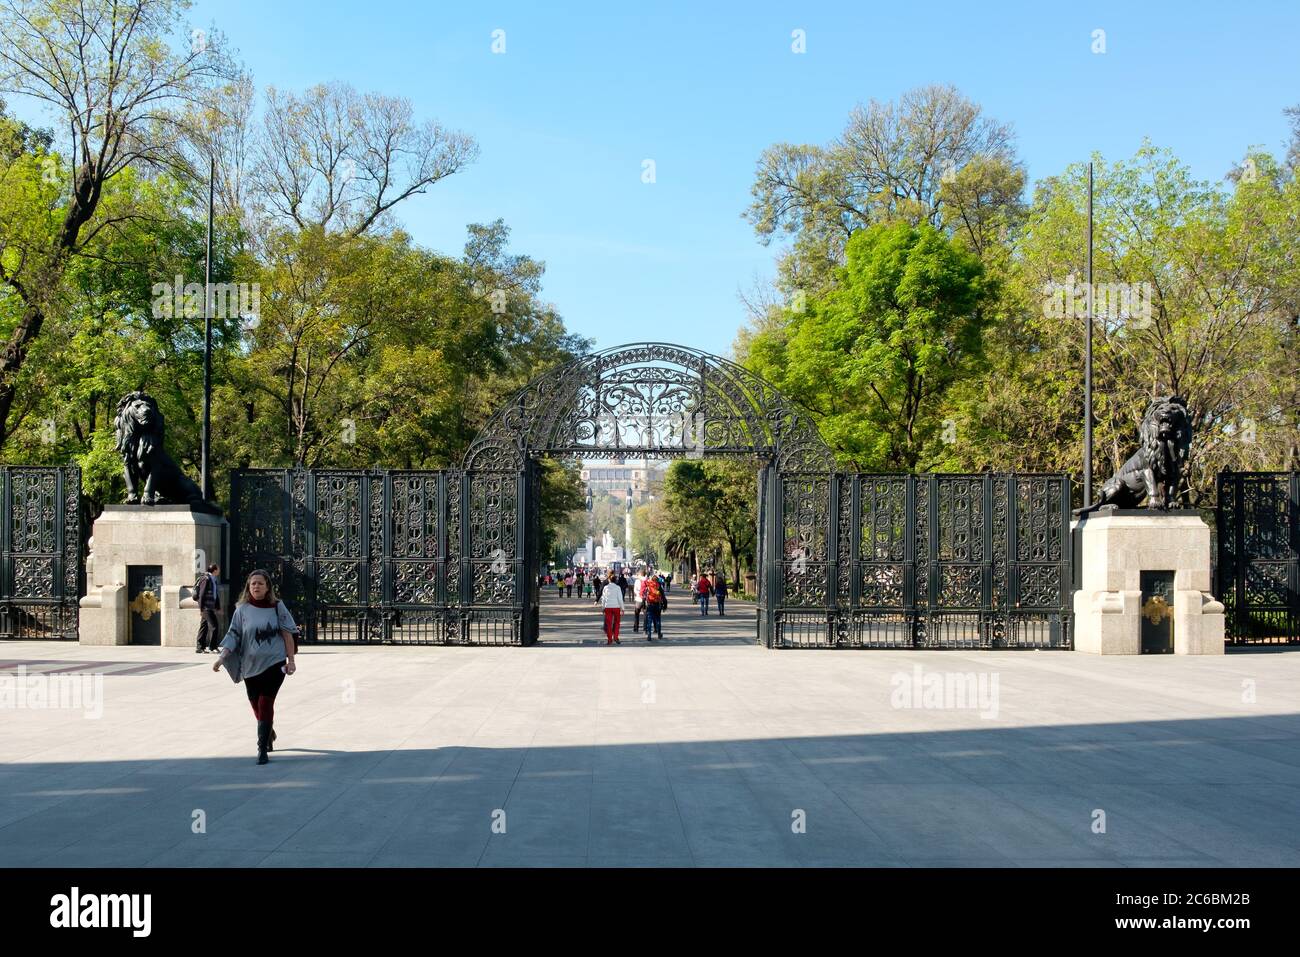 Lions Gate entrance to Chapultepec Park in Mexico City Stock Photo - Alamy